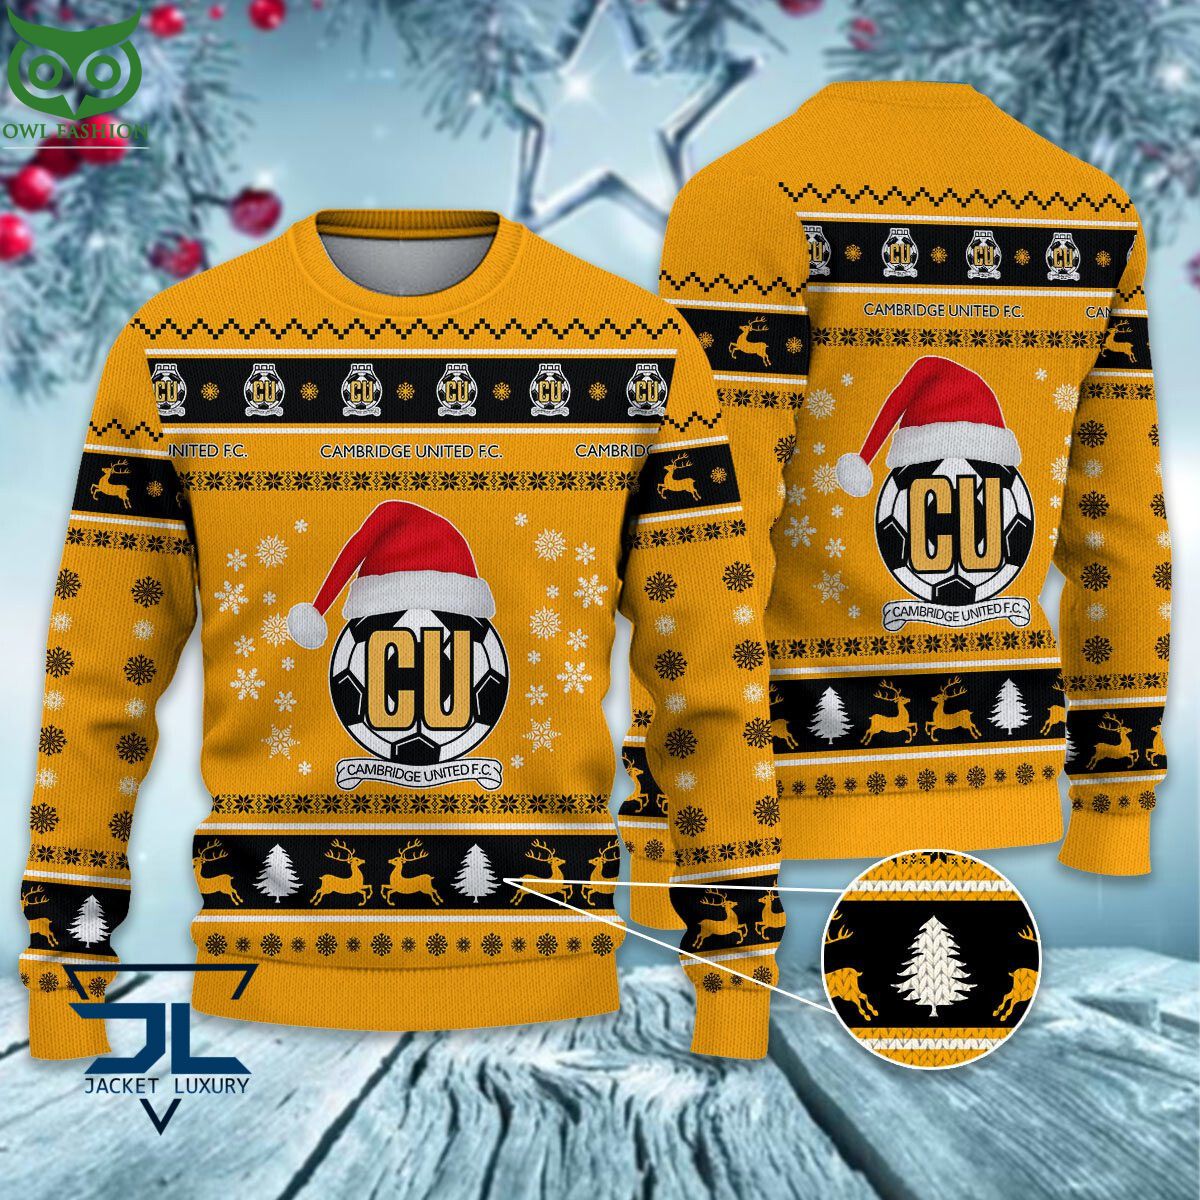 Cambridge United F.C EPL League Cup Ugly Sweater This is awesome and unique